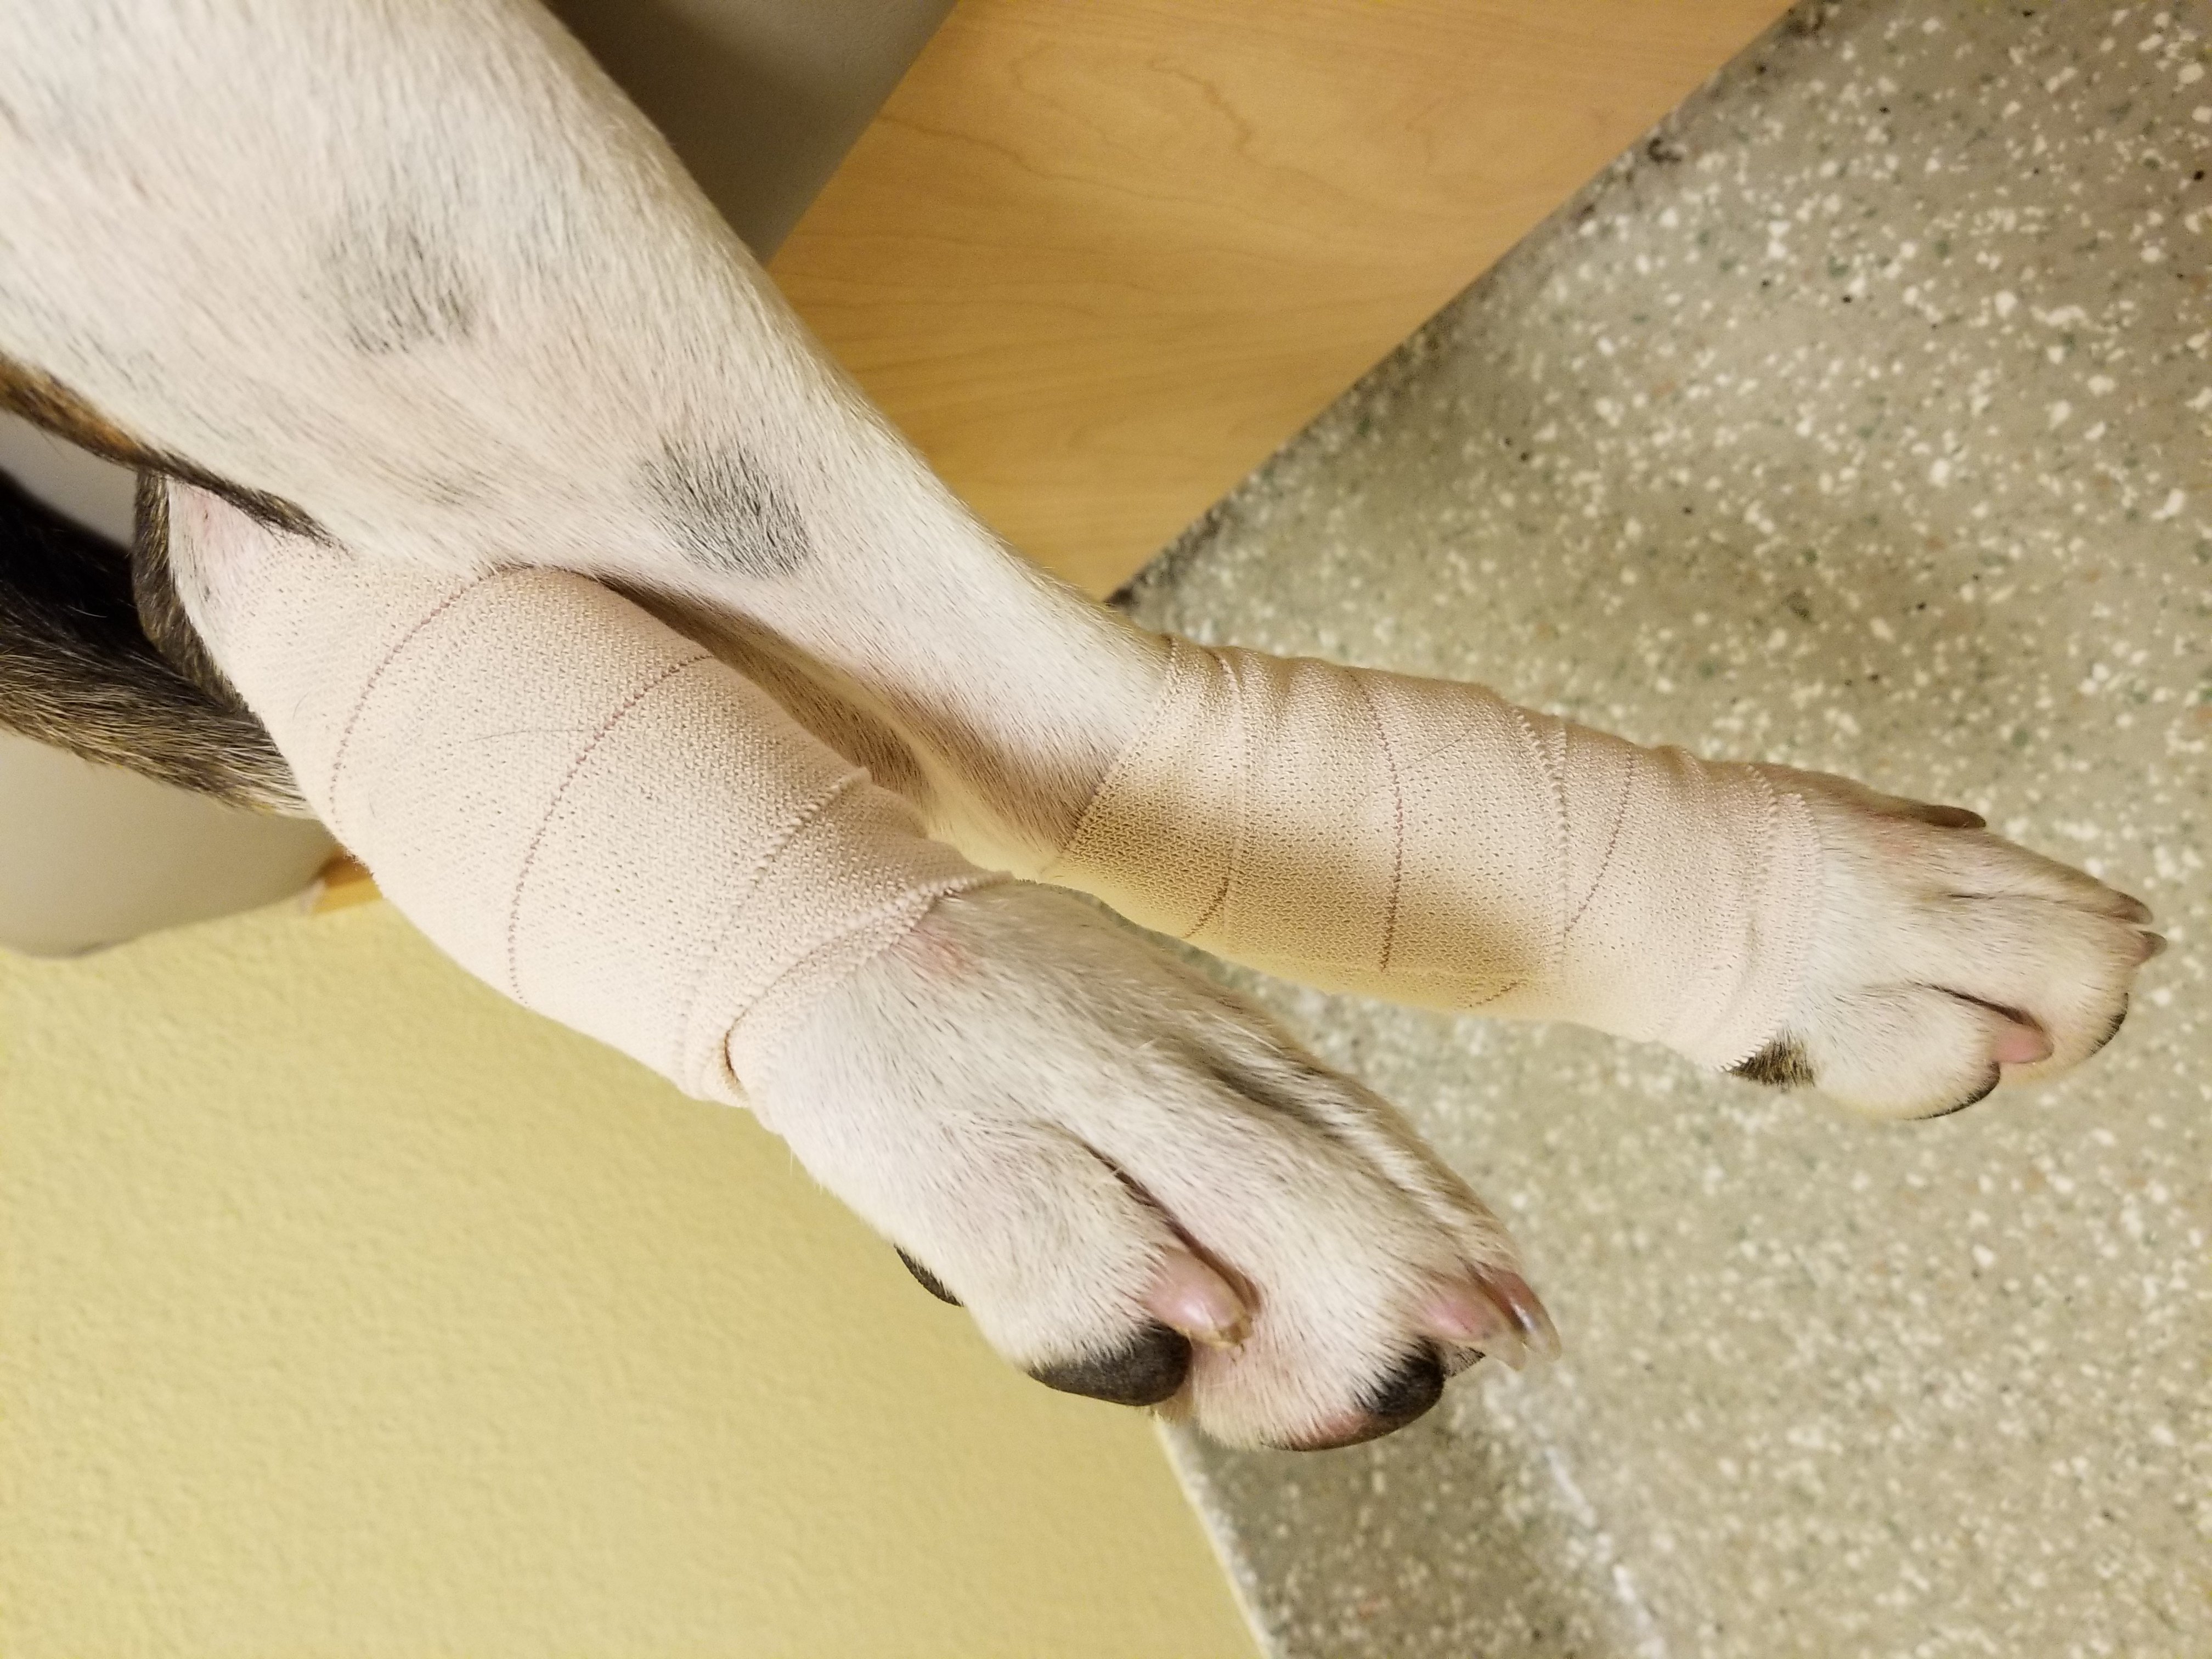 wounded dog legs